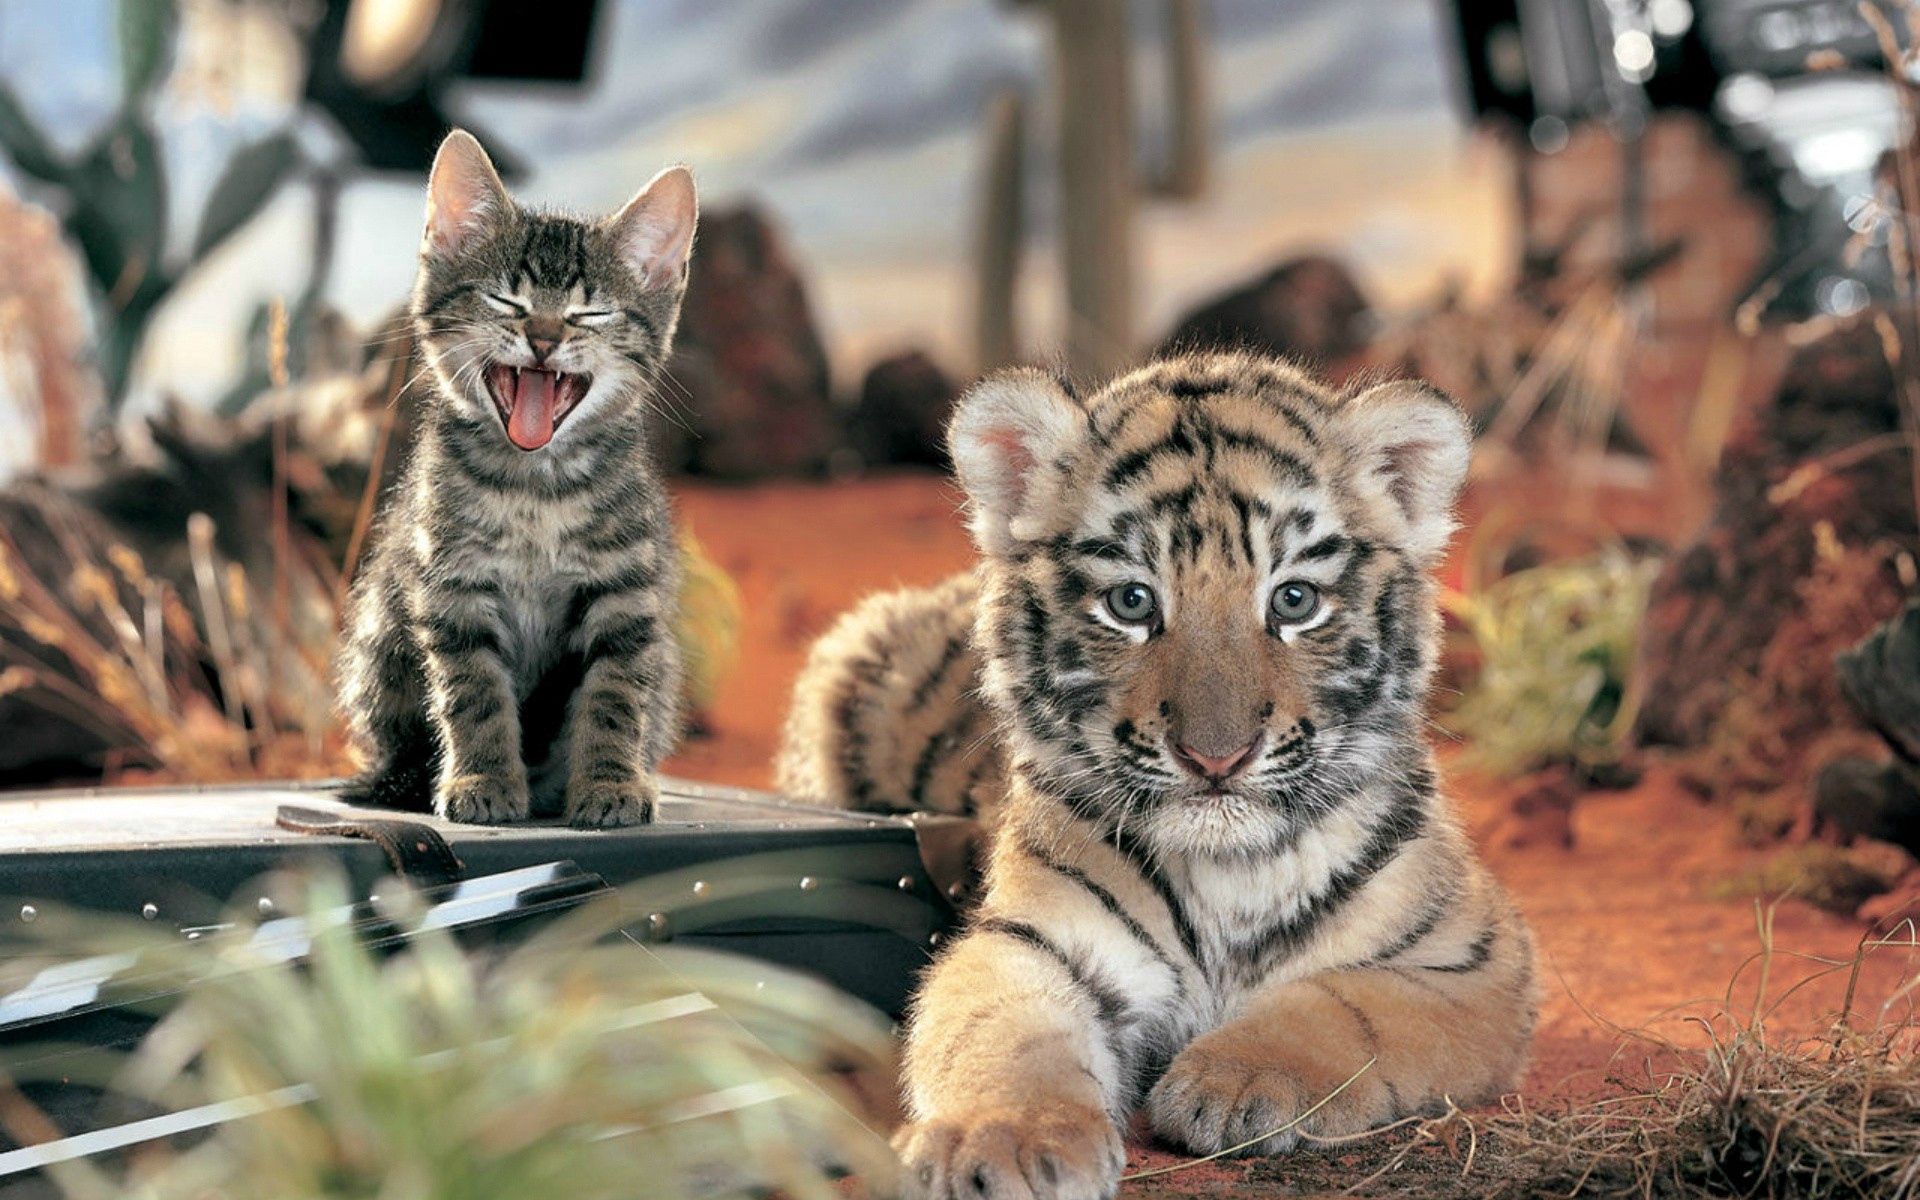 Wallpaper Full HD cats, animals, kitty, kitten, to lie down, lie, tiger, open mouth, scream, cry, tiger cub